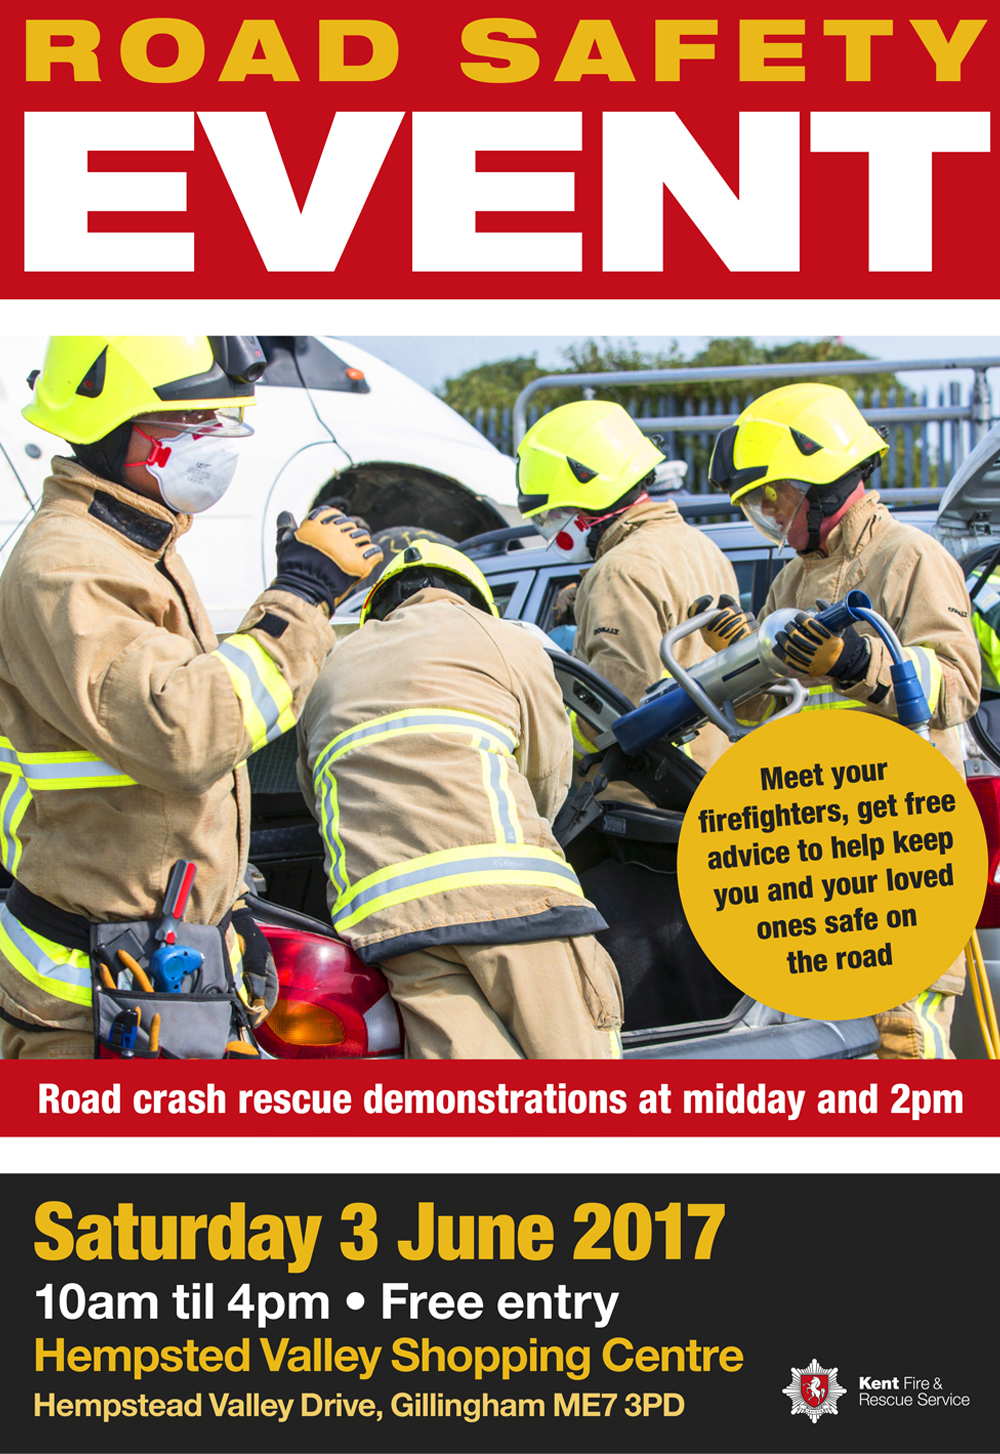 Kent Fire & Rescue Road Safety Event | Saturday 3rd June